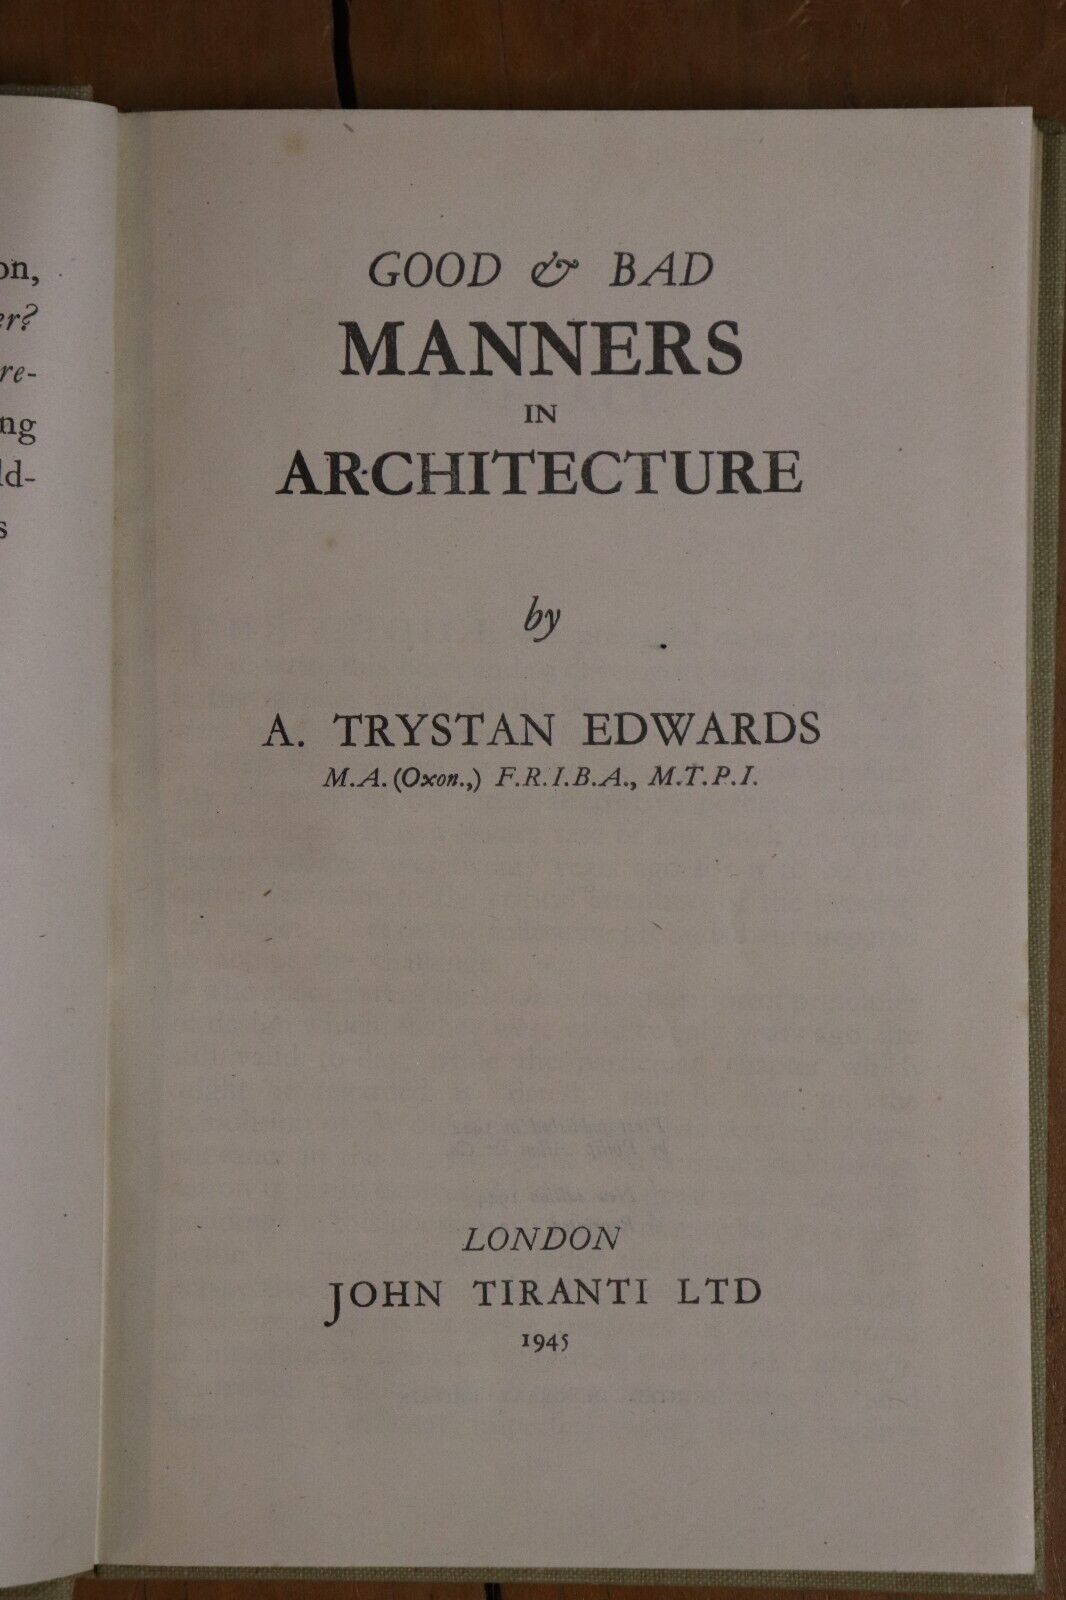 Good & Bad Manners In Architecture - 1945 - Hardcover Architectural Book